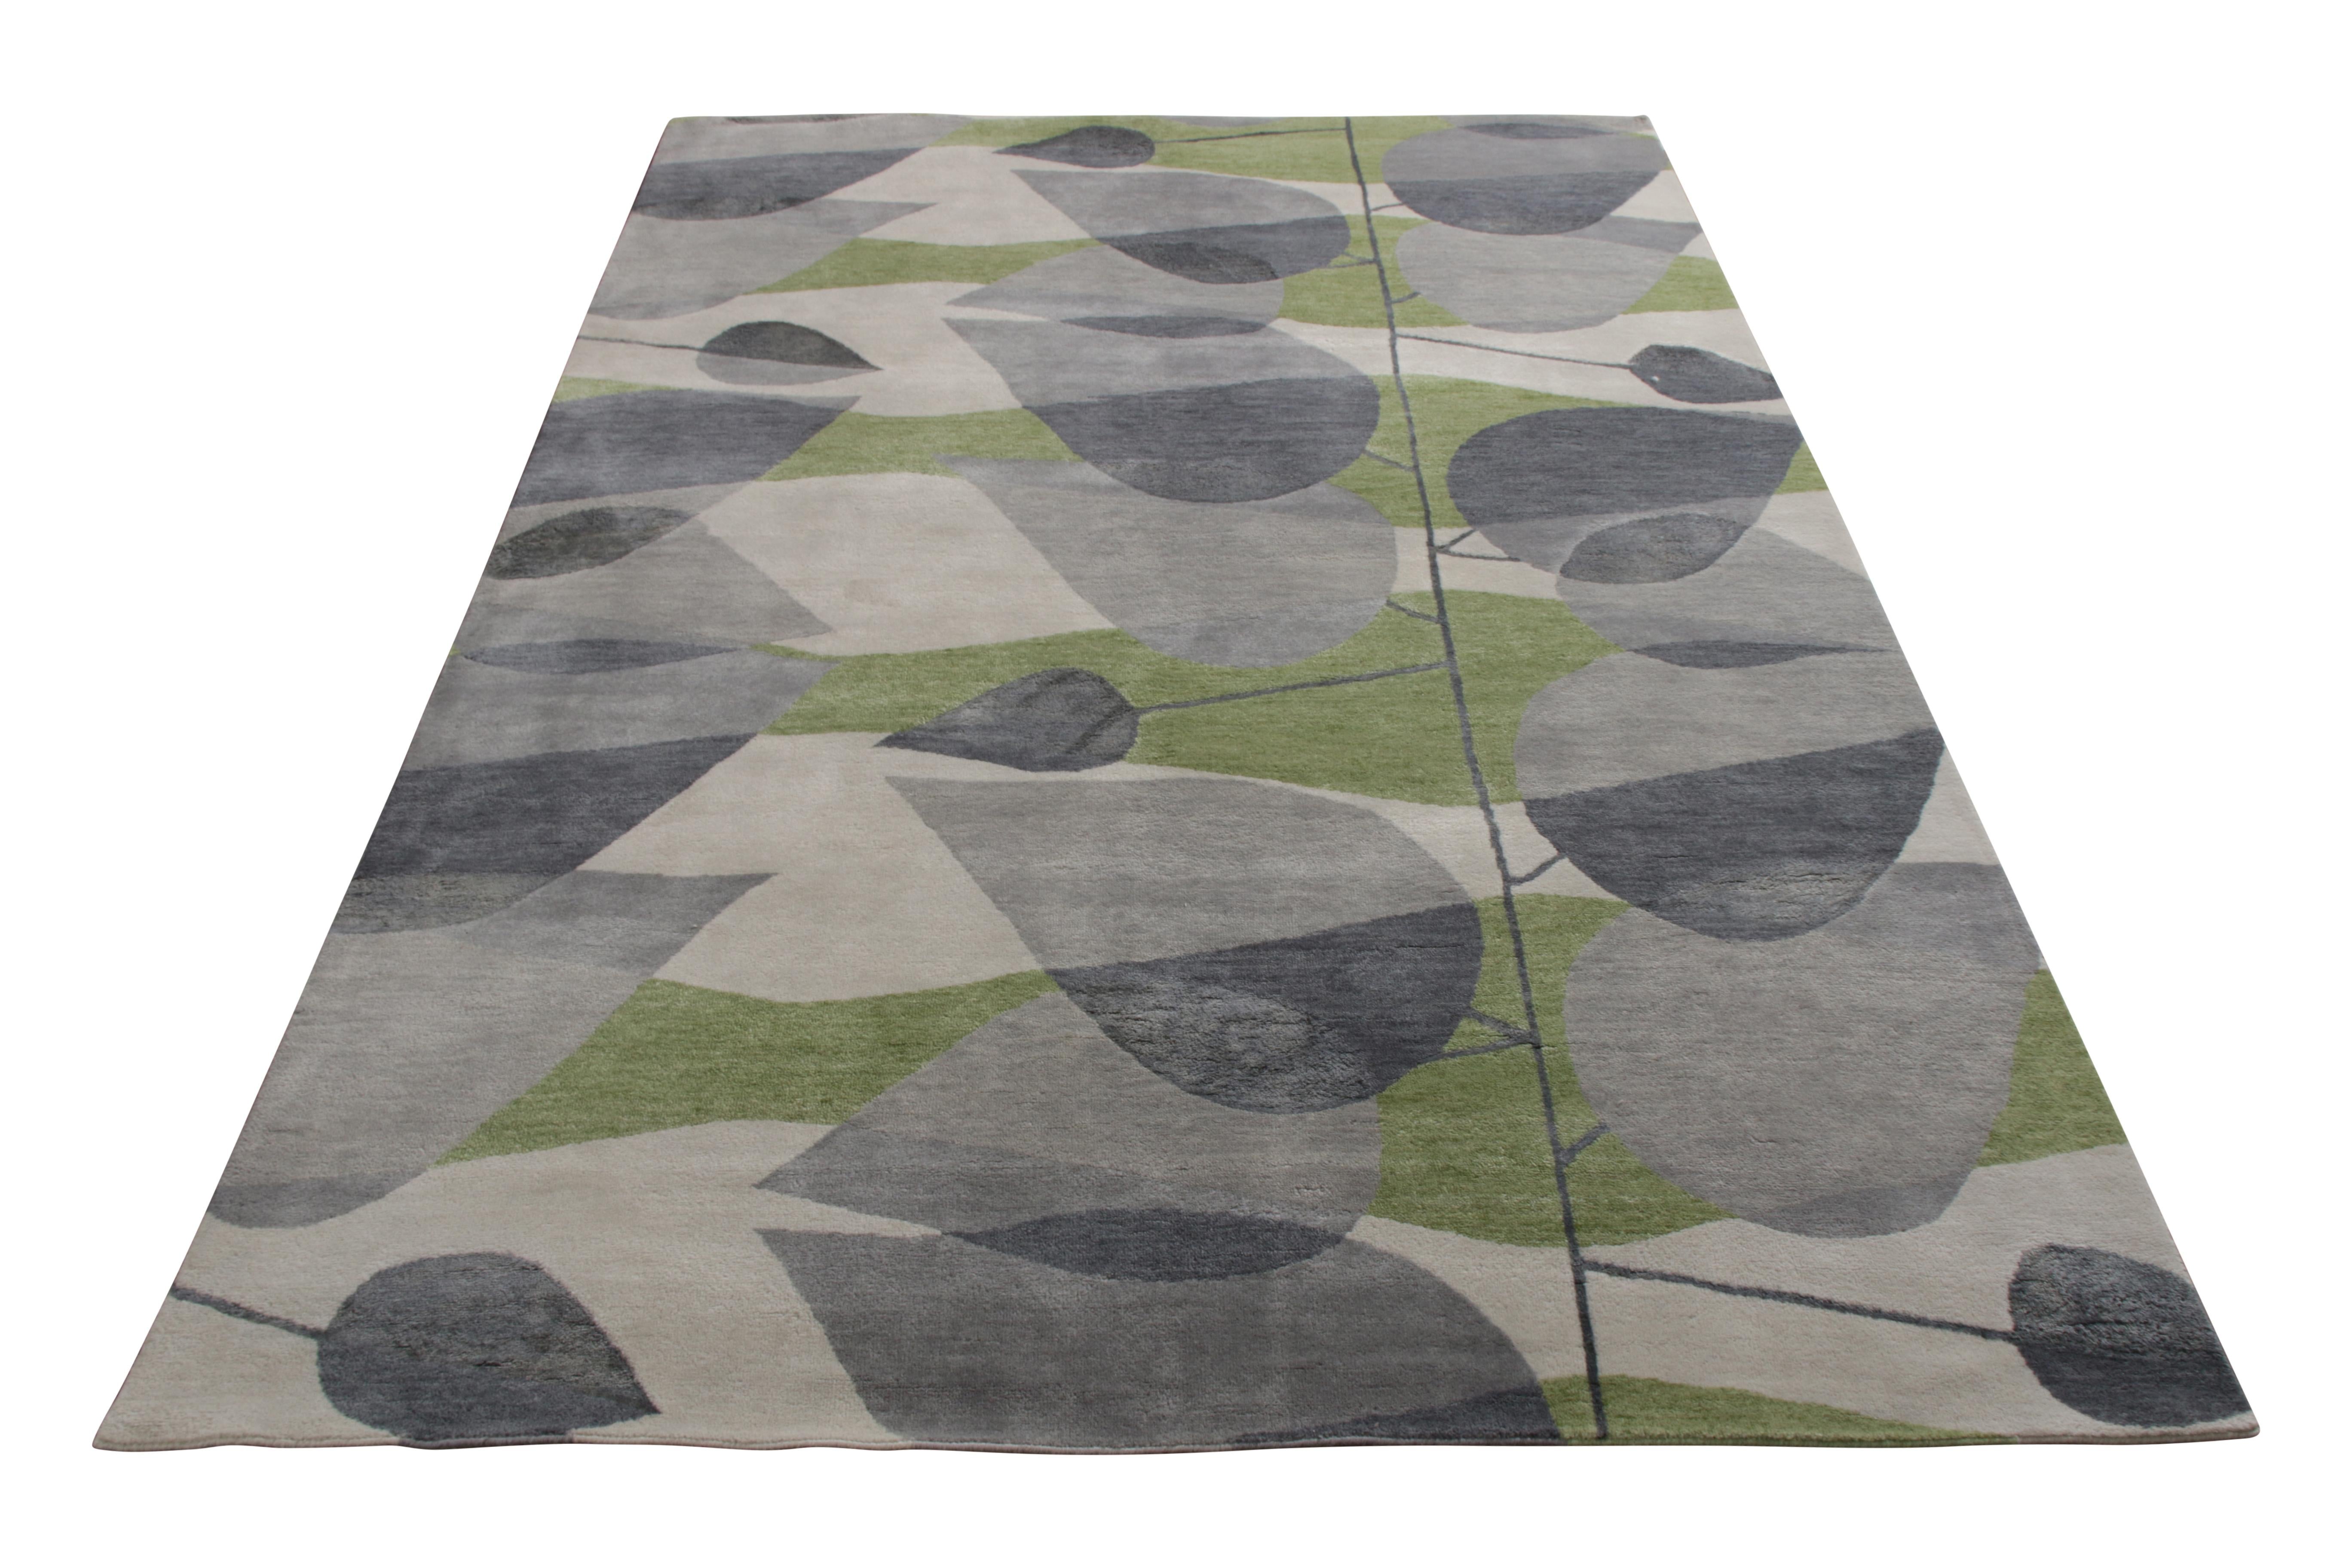 A 6 x 9 Mid-Century Modern rug from the titular collection by Rug & Kilim’s—a reimaging of bold 1950s style. Hand knotted in wool and silk, enjoying playful Deco sensibilities in chic silver-gray and green hues throughout the pattern. Particularly